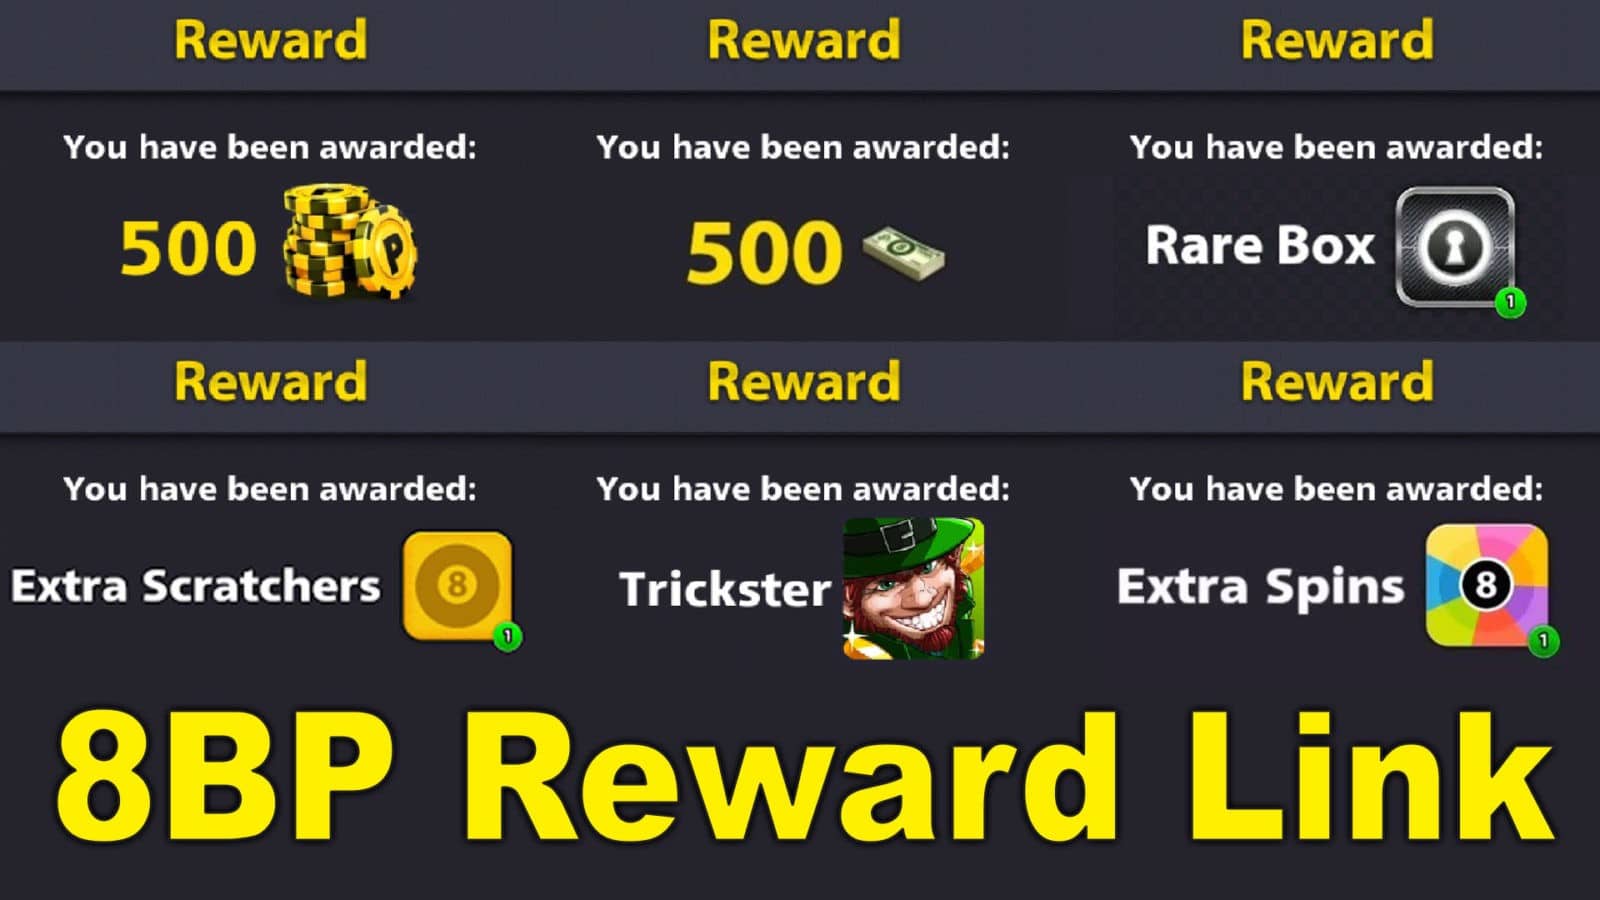 8 Ball Pool Free Coin, Cue & Cash Reward Link (Updated Today) - 